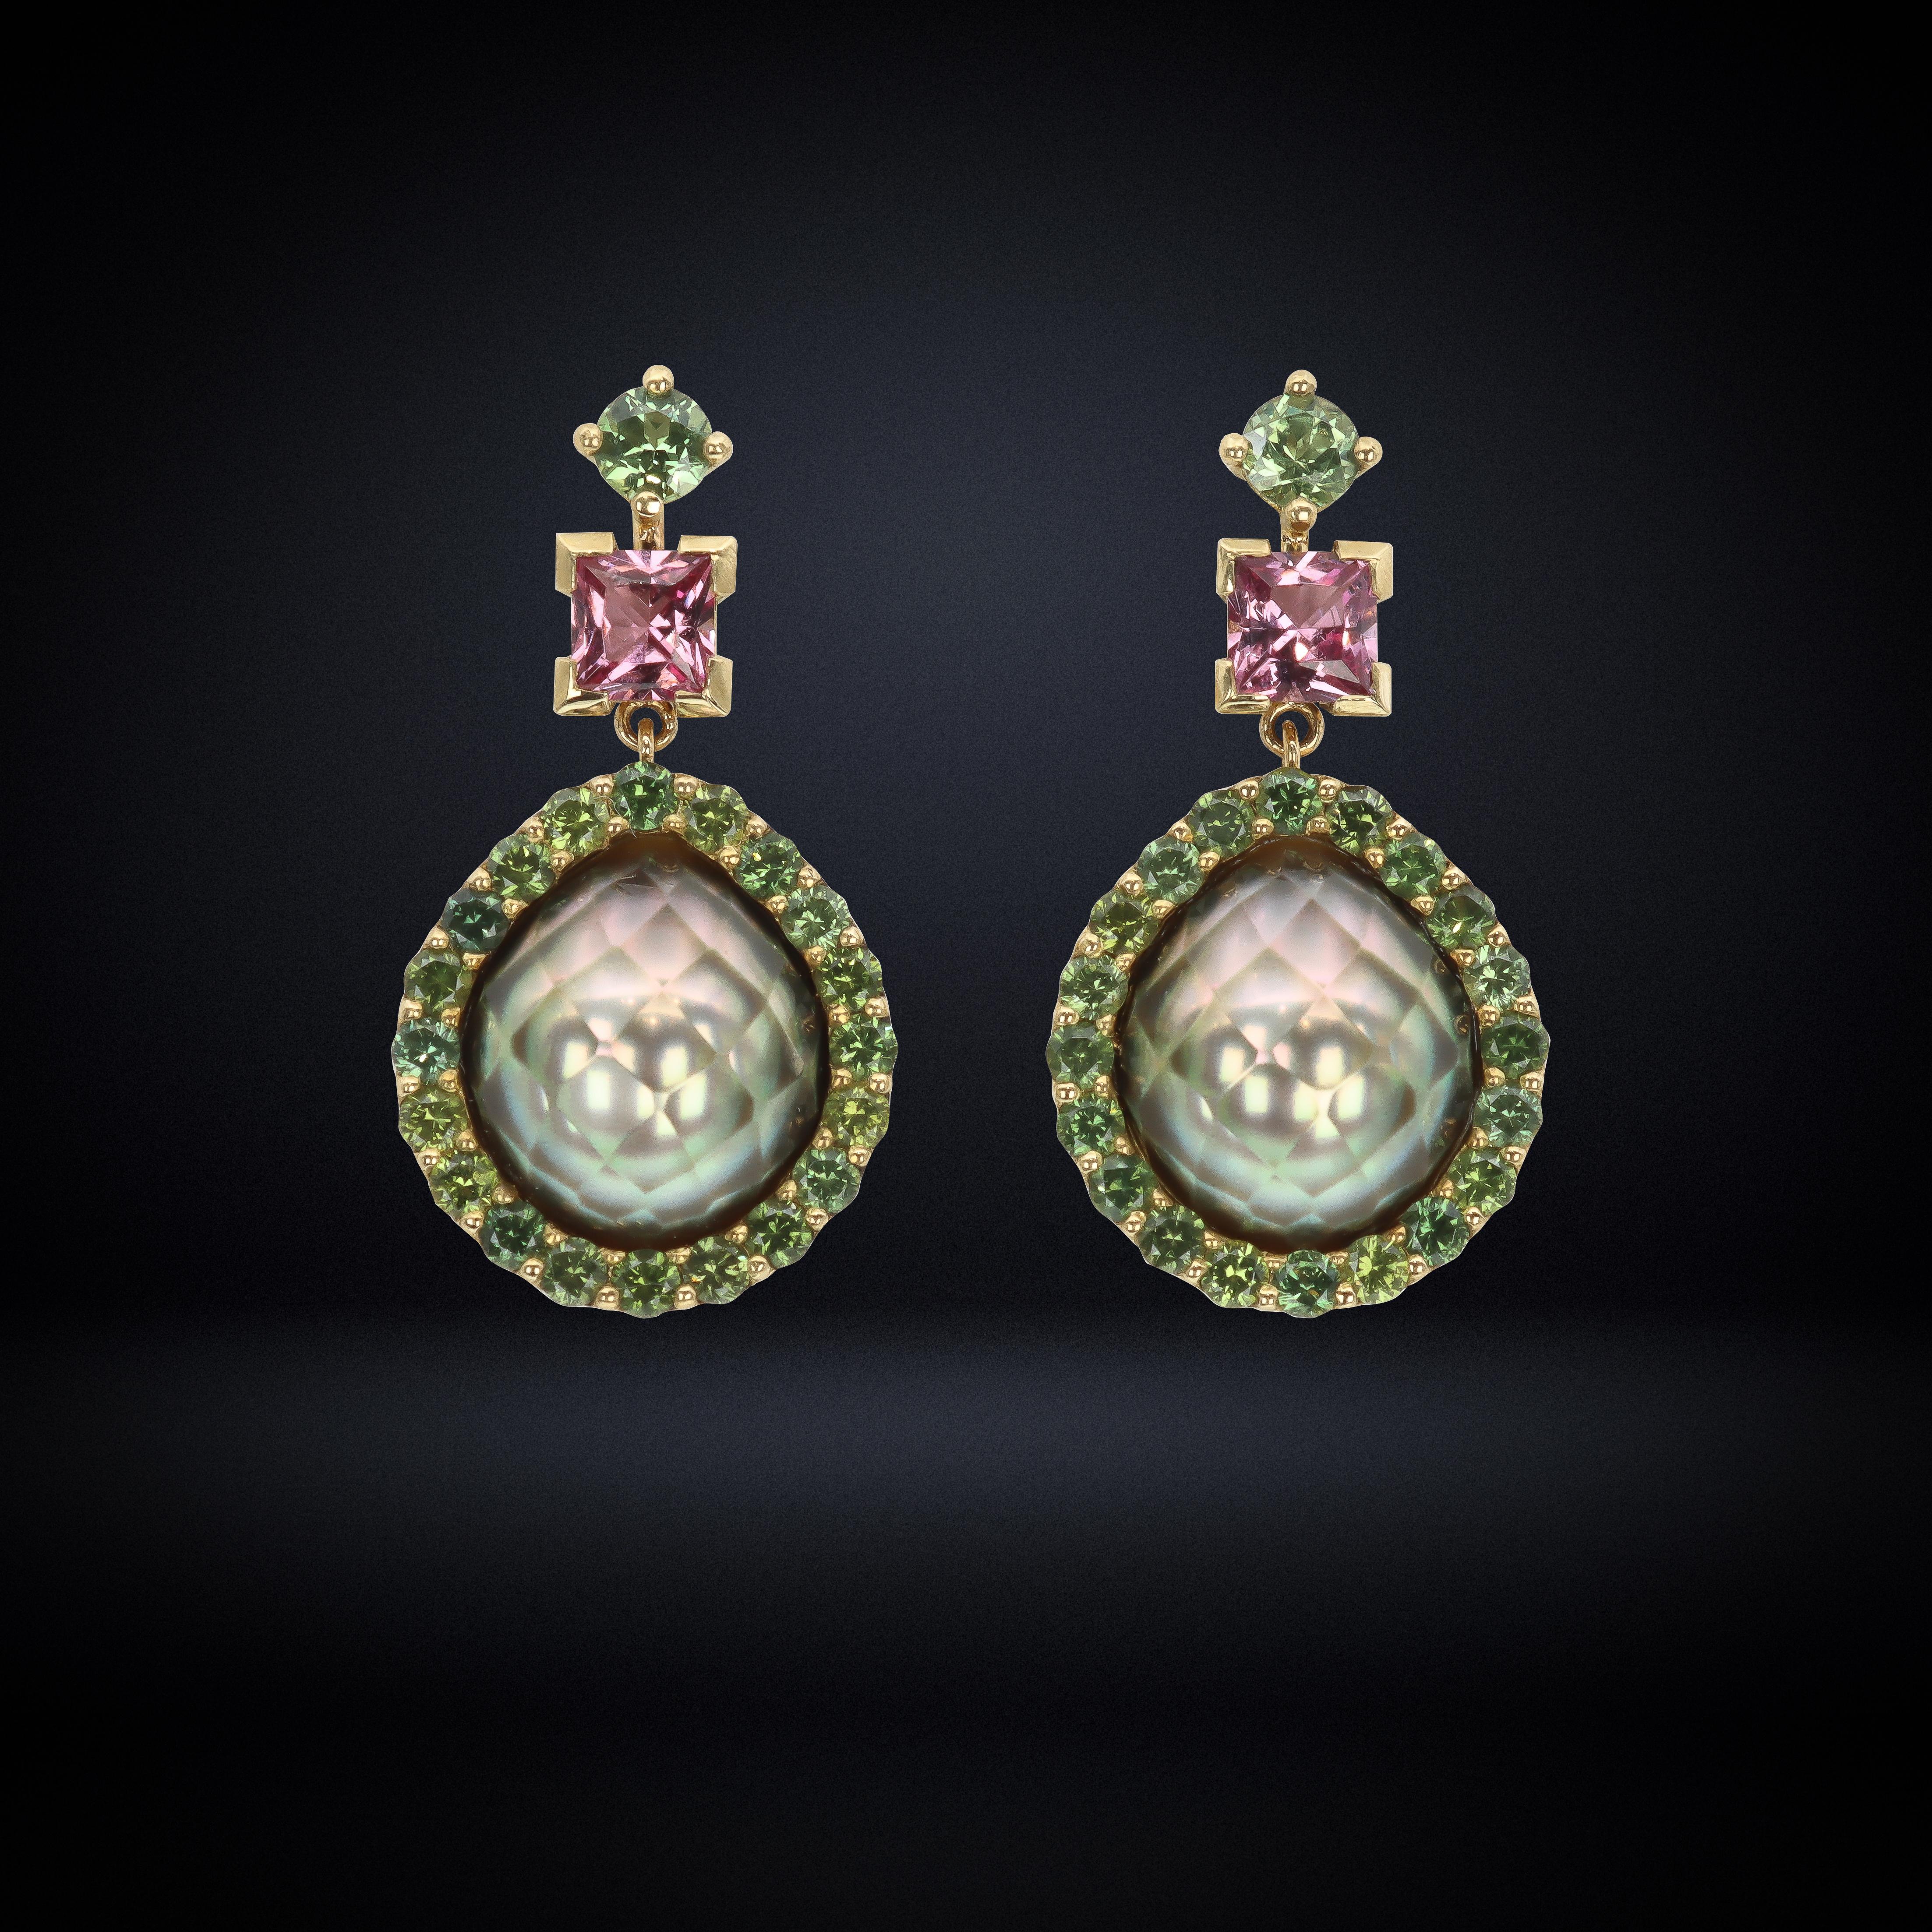 By Aventina-Spencer, these one-of-a-kind Earrings feature 2.11 carats of natural round brilliant cut Madagascan Colour Change Green Sapphires, two princess cut Malaya Garnets with a total weight of 0.95 carats and two Hand Faceted Marc'Harit Halfcut